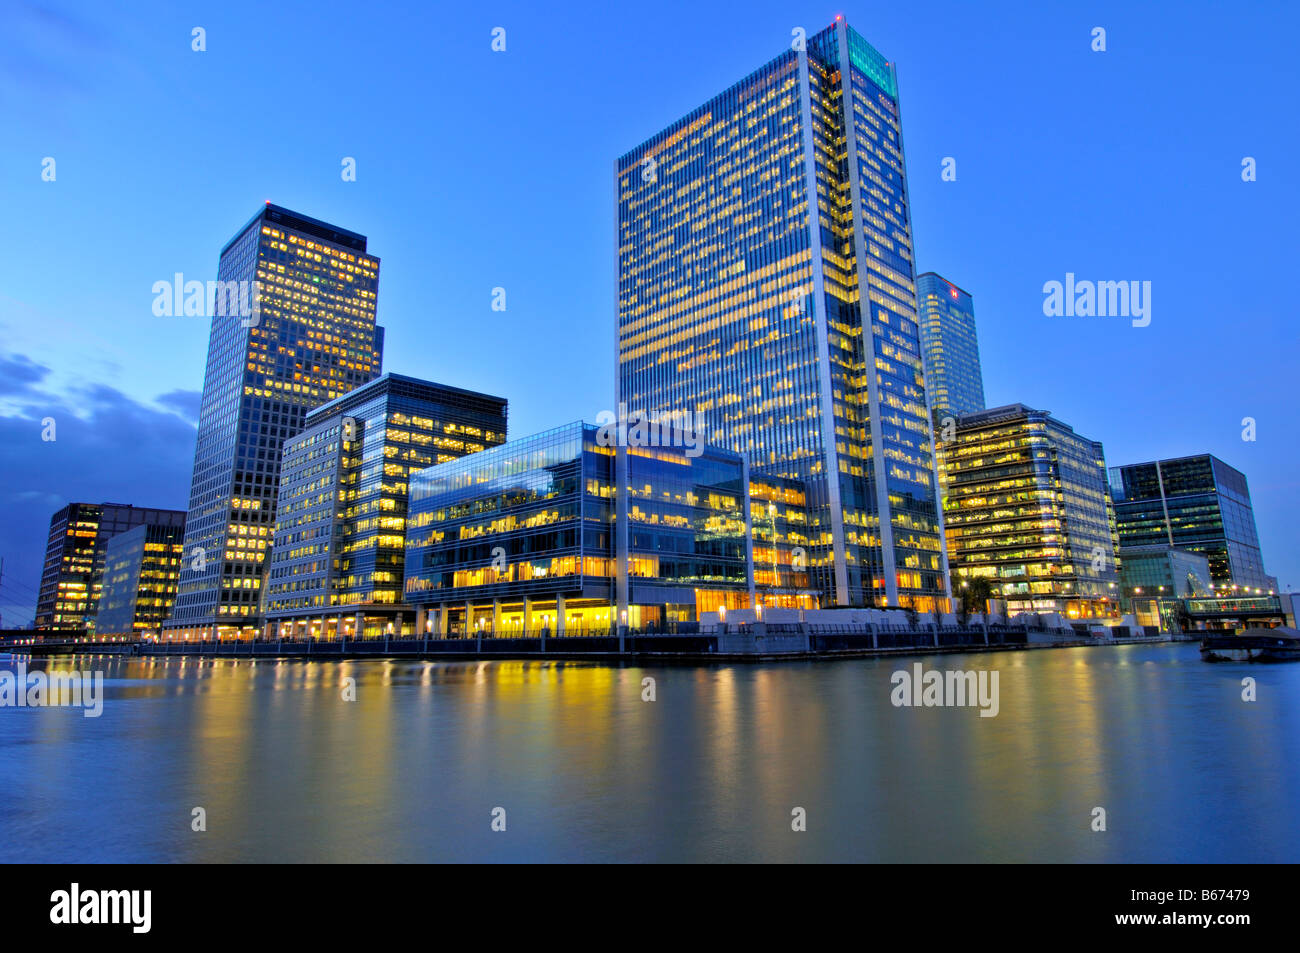 Nightview Immobilier Canary Wharf, London, Royaume-Uni Banque D'Images